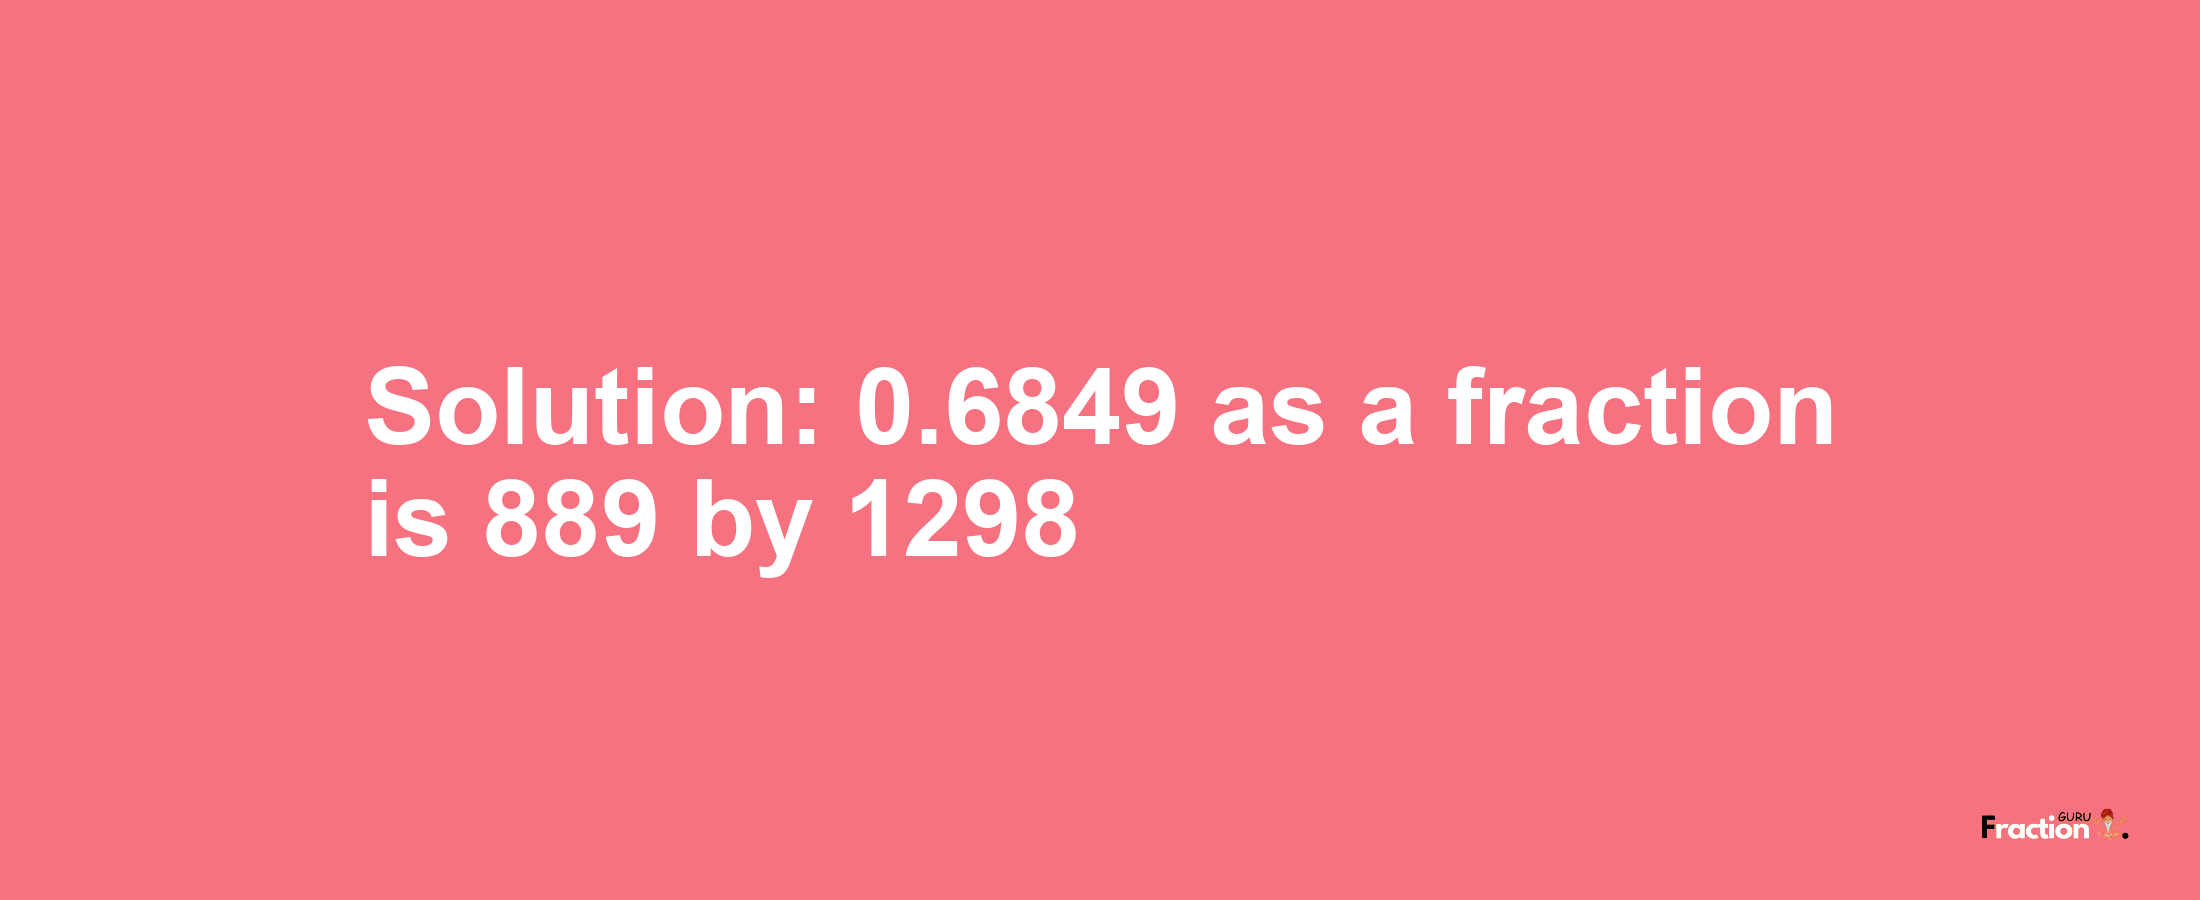 Solution:0.6849 as a fraction is 889/1298